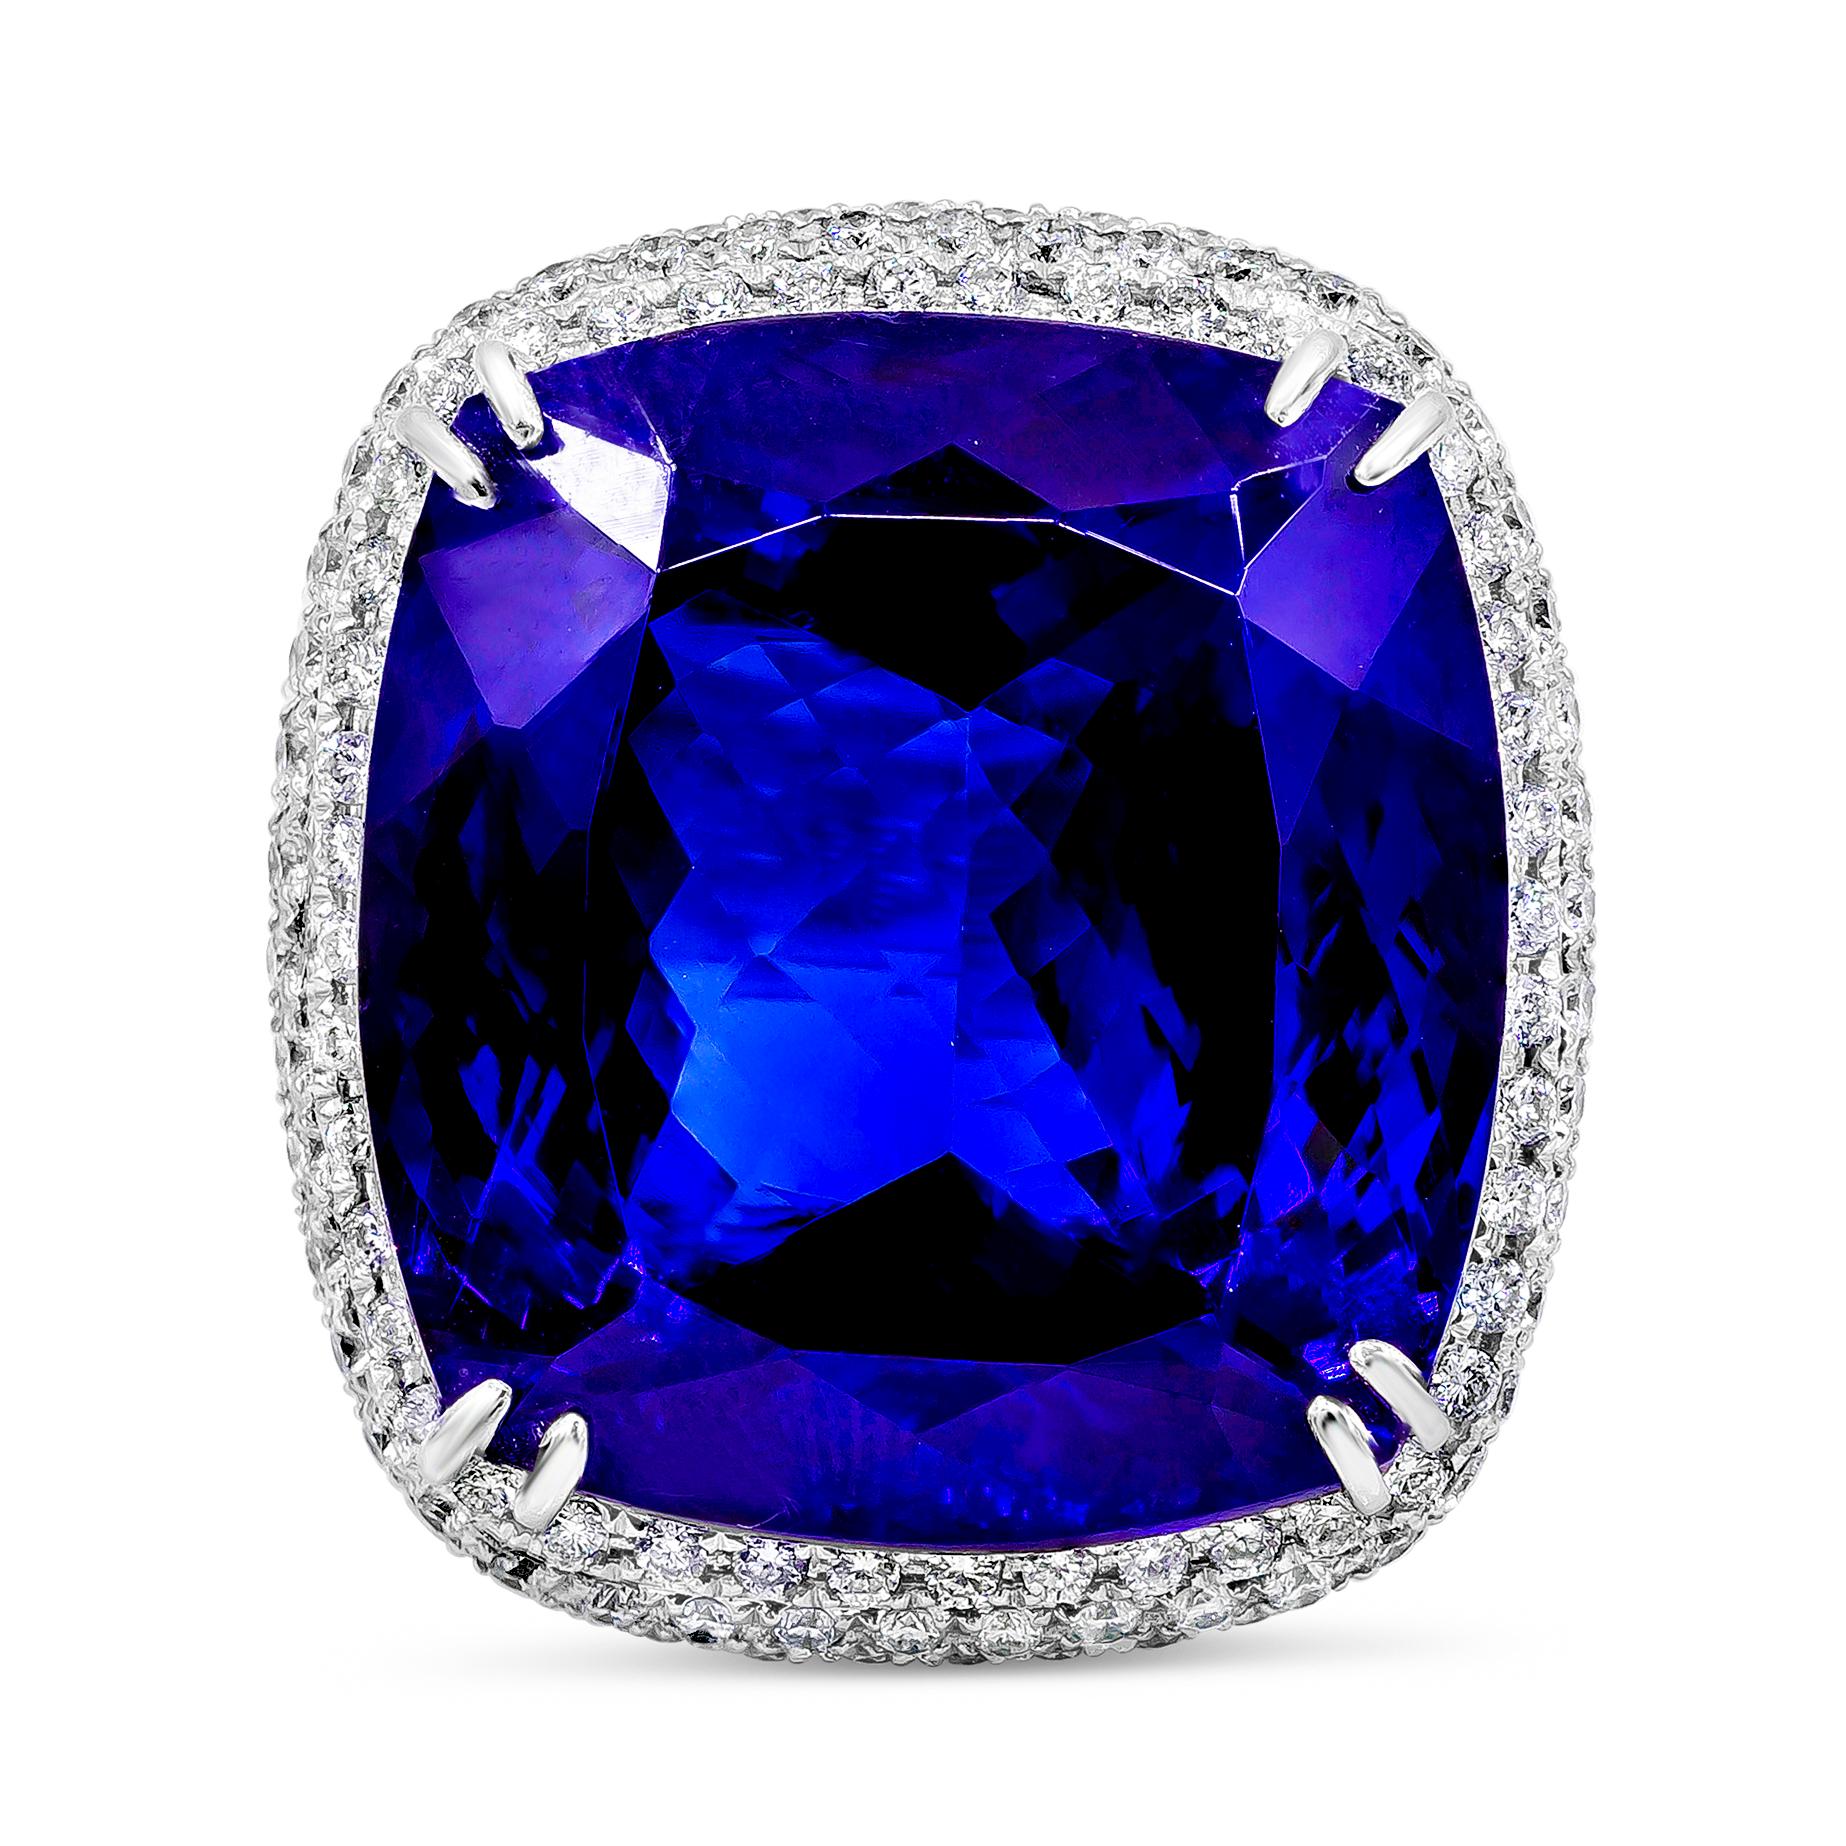 A splendid cocktail ring showcasing an amazing color-rich cushion cut tanzanite weighing 44.04 carats total. Elegantly set in a double claw prongs setting, with micro-pave diamonds set around the center stone. Diamonds weigh 2.43 carats total. Made